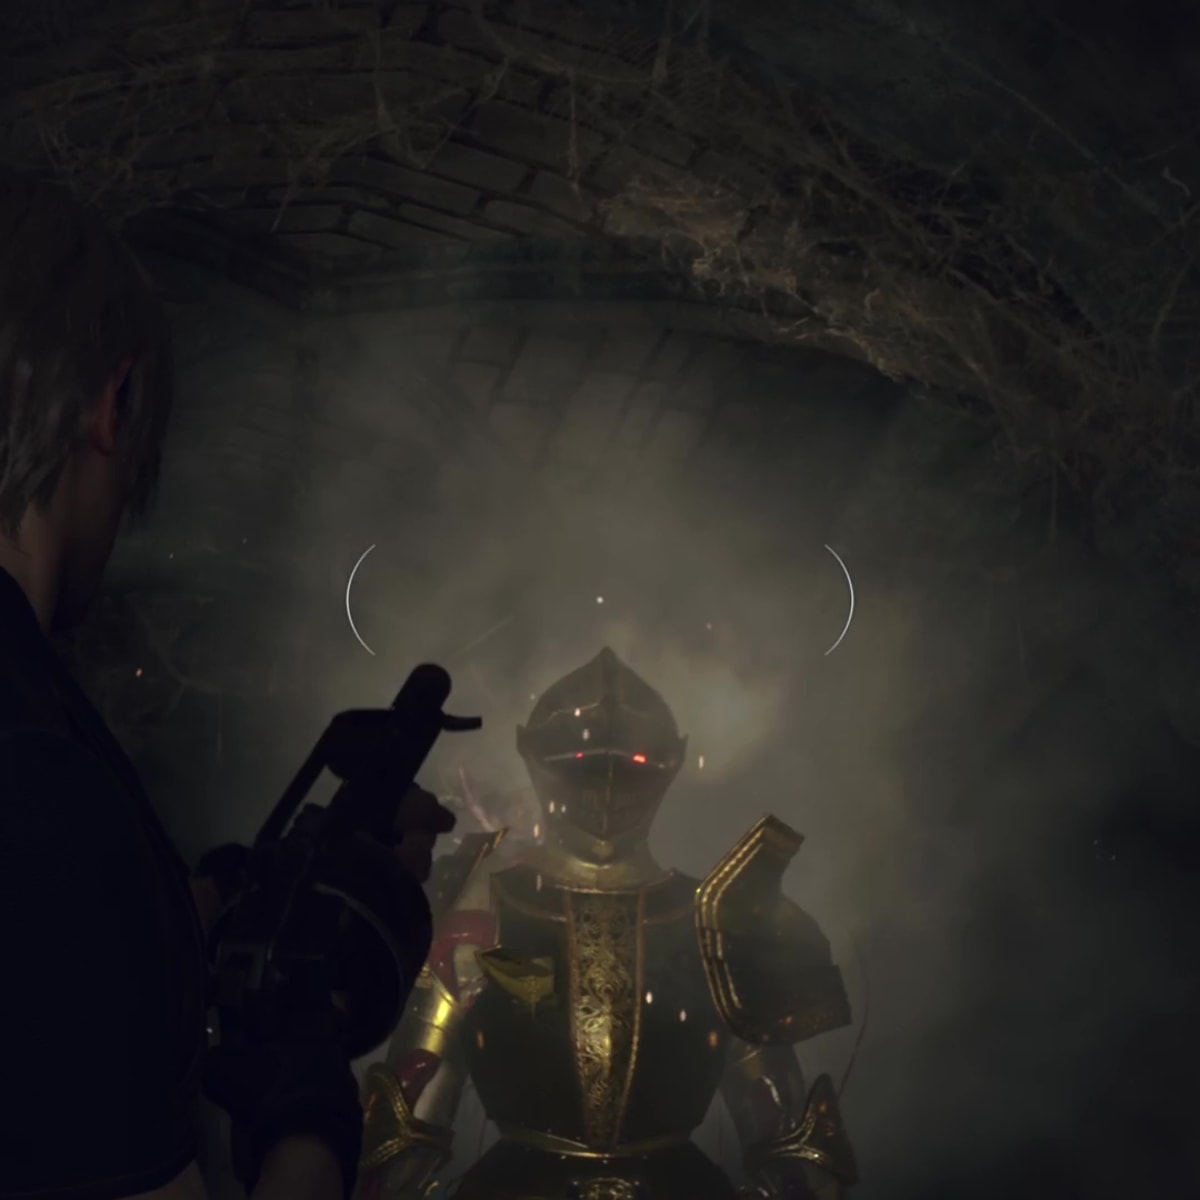 The real knight in shinning armor, Resident Evil 4 Remake